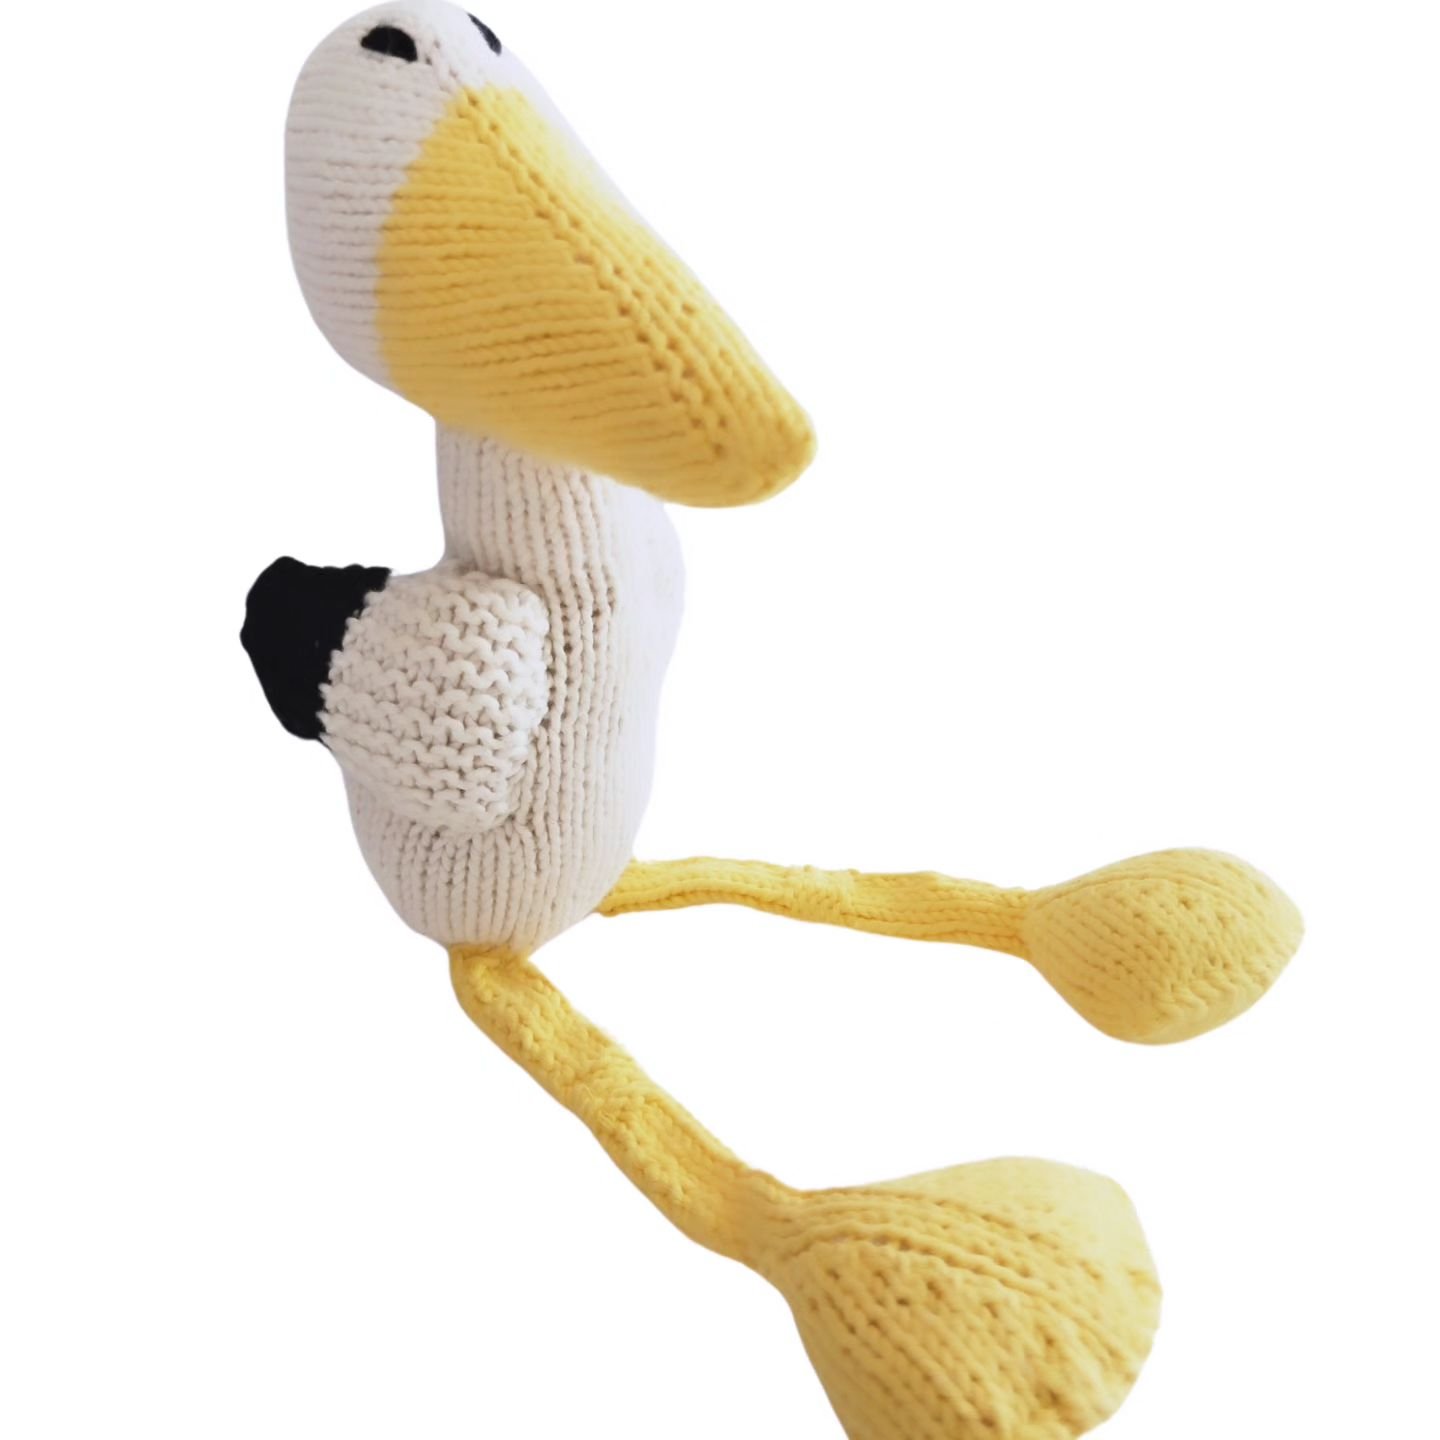 Happy Friday ✨
Organic cotton stork - recently named Marge by a new owner and we think that might just stick ✨ 
#organiccottontoys #organiccotton #handknitted #slowmade #chooseethical #ethicaltoys #empoweringwomen #socialimpact #fairtrade